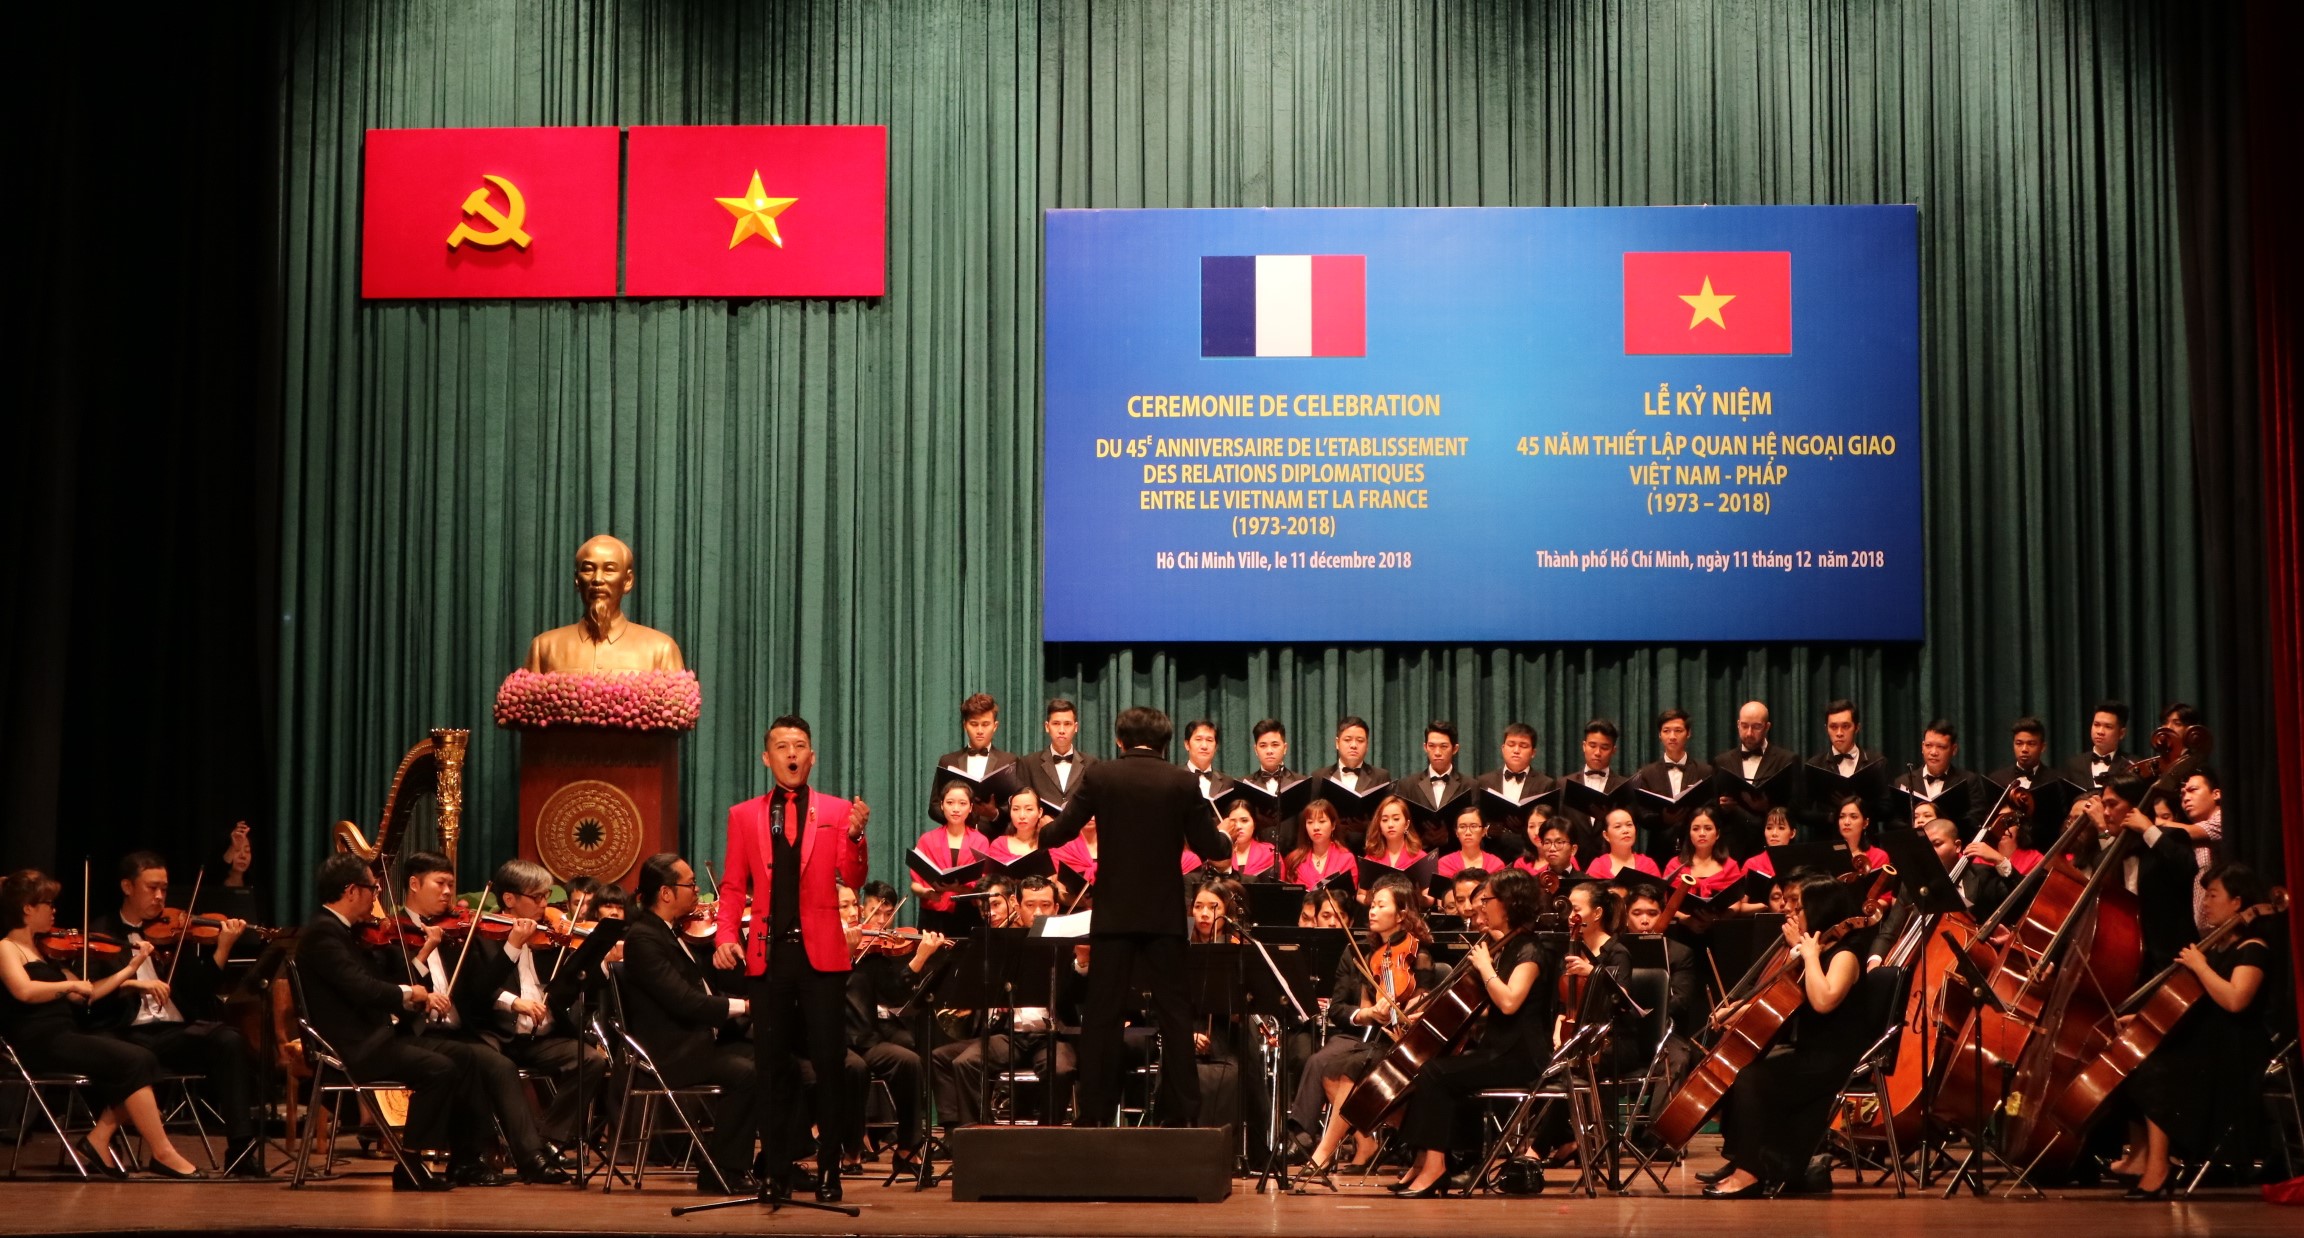 A musical performance at at an event to celebrate 45 years of diplomatic relations between Vietnam and France In Ho Chi Minh City, December 11, 2018. Photo: Viet Toan / Tuoi Tre News